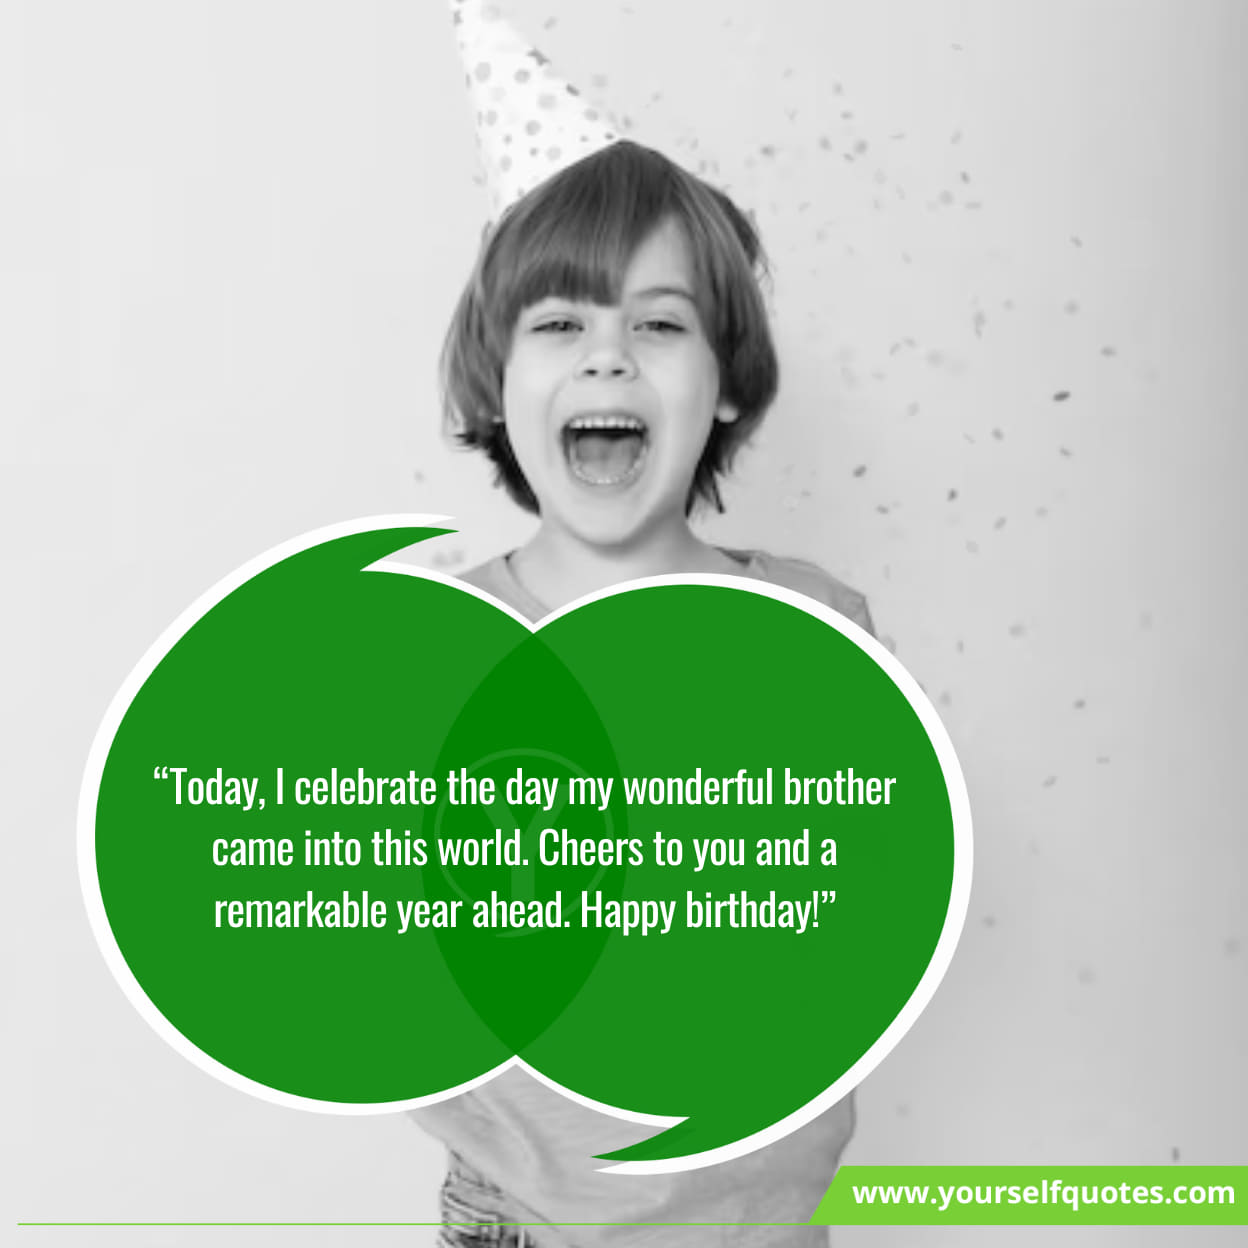 Best Birthday Wishes For Brother - Immense Motivation